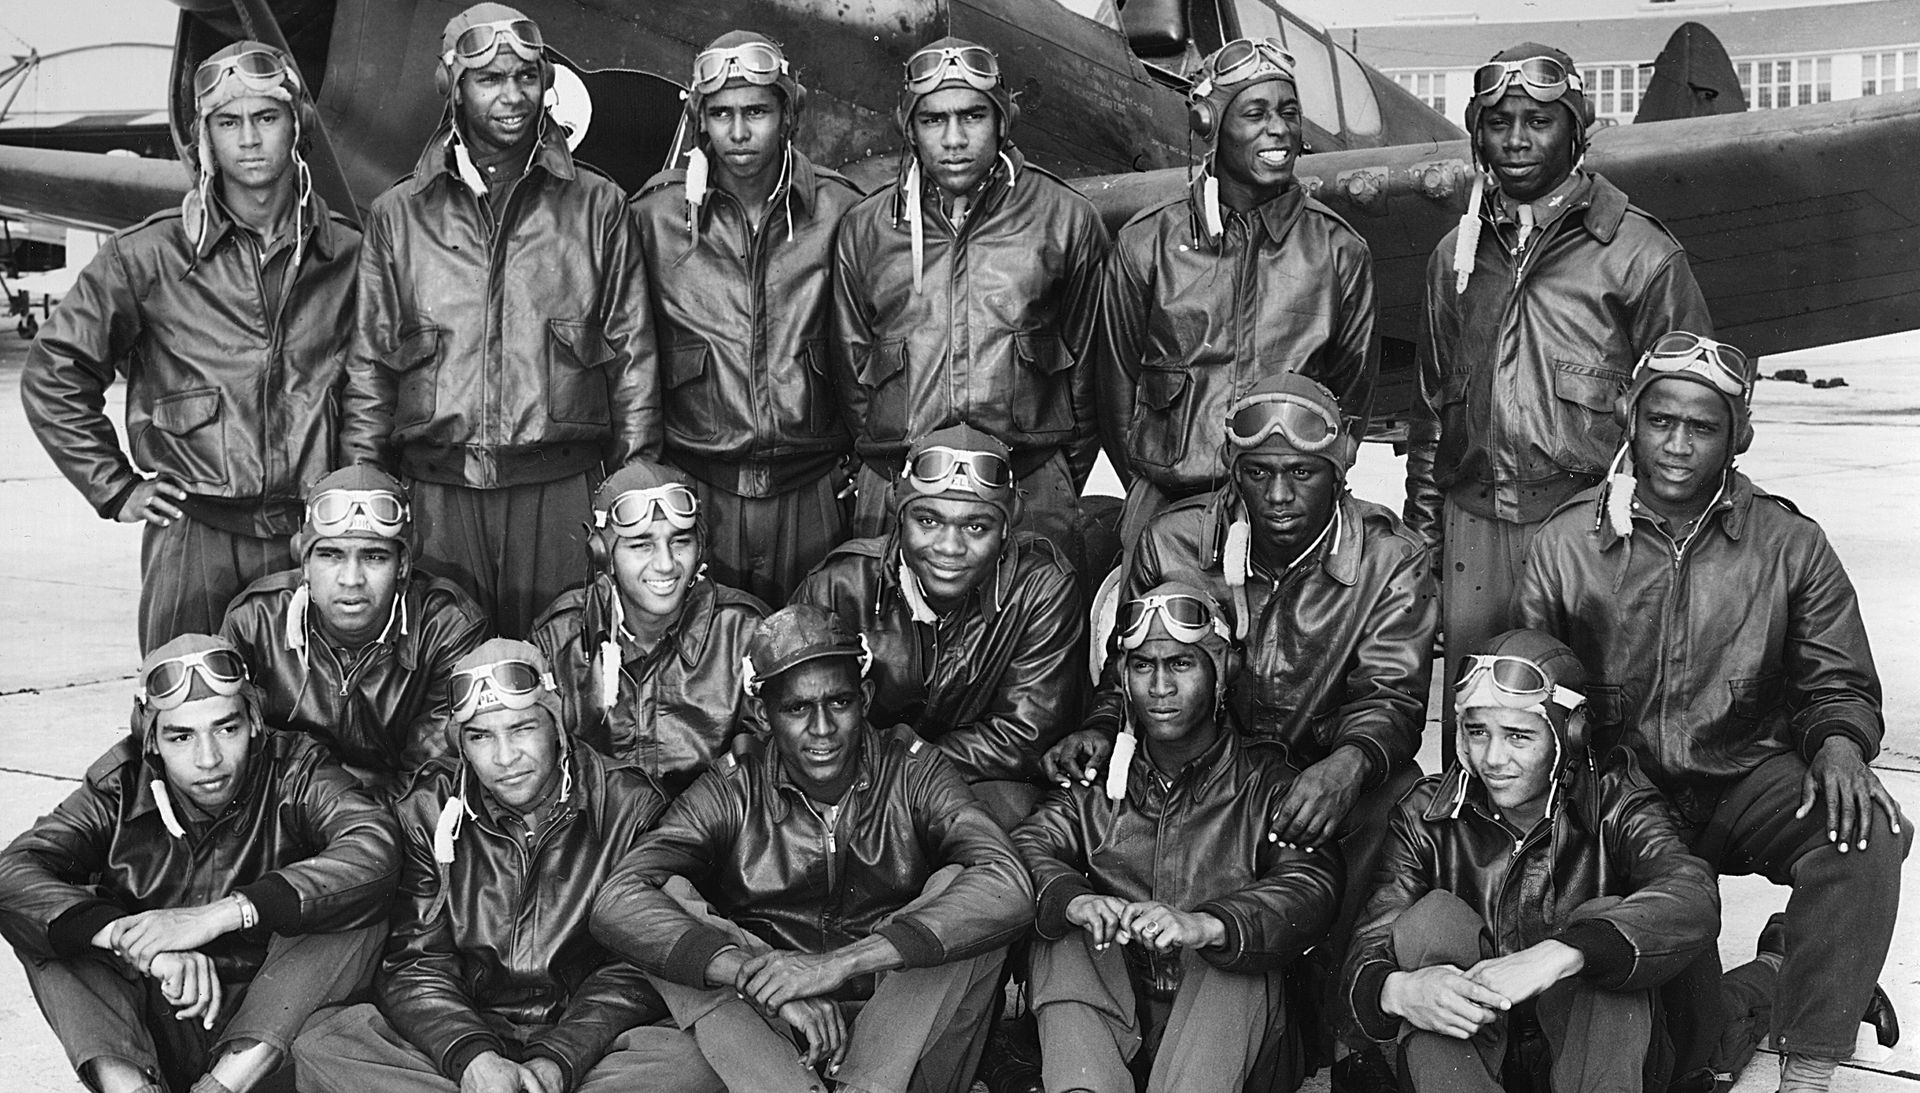 tuskegee airmen at tuskegee army flying school, in bomber jackets with a fighter airplane